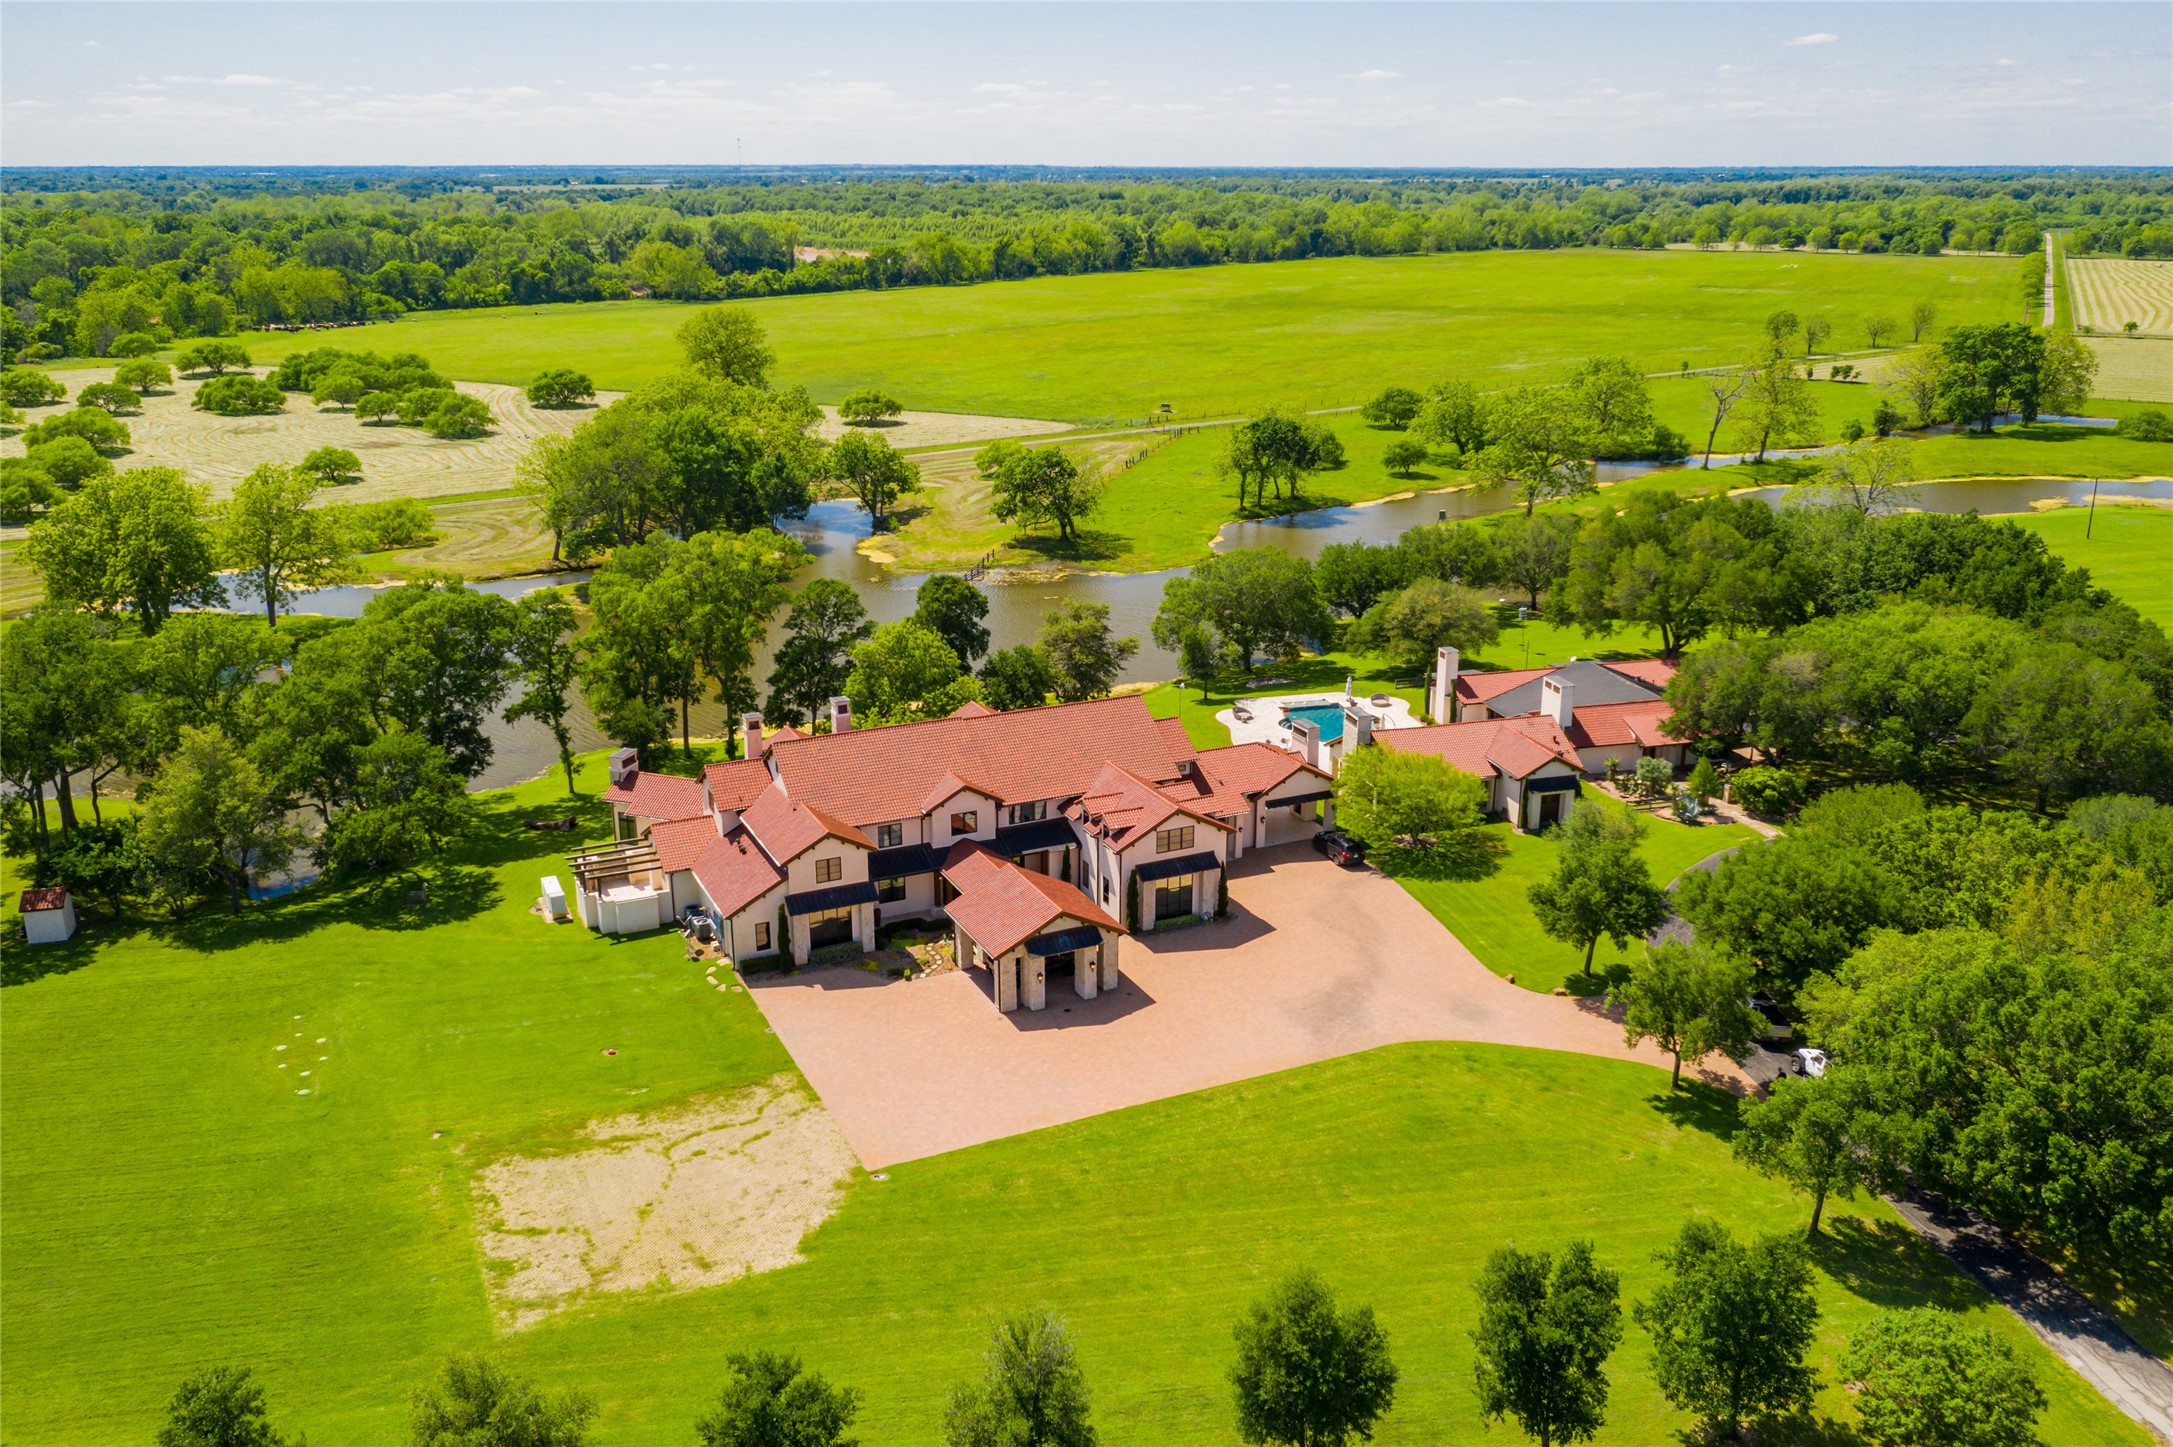 The incomparable Board Oaks Ranch in Hempstead, includes 1,408+/- acres of 3.5 miles of Brazos River frontage with beaches, ponds, 8+ acre stocked fishing lake, 5 water wells, improved/extensive open pastures and thick woods providing natural habitat for wildlife. Aerial view shows exquisitely appointed 4 bedroom/5 full bath/6 half baths main house, pool/hot tub/water features, remodeled 3 bedroom/3 bath guesthouse, barndominium, 8 stall horse barn and so much more!